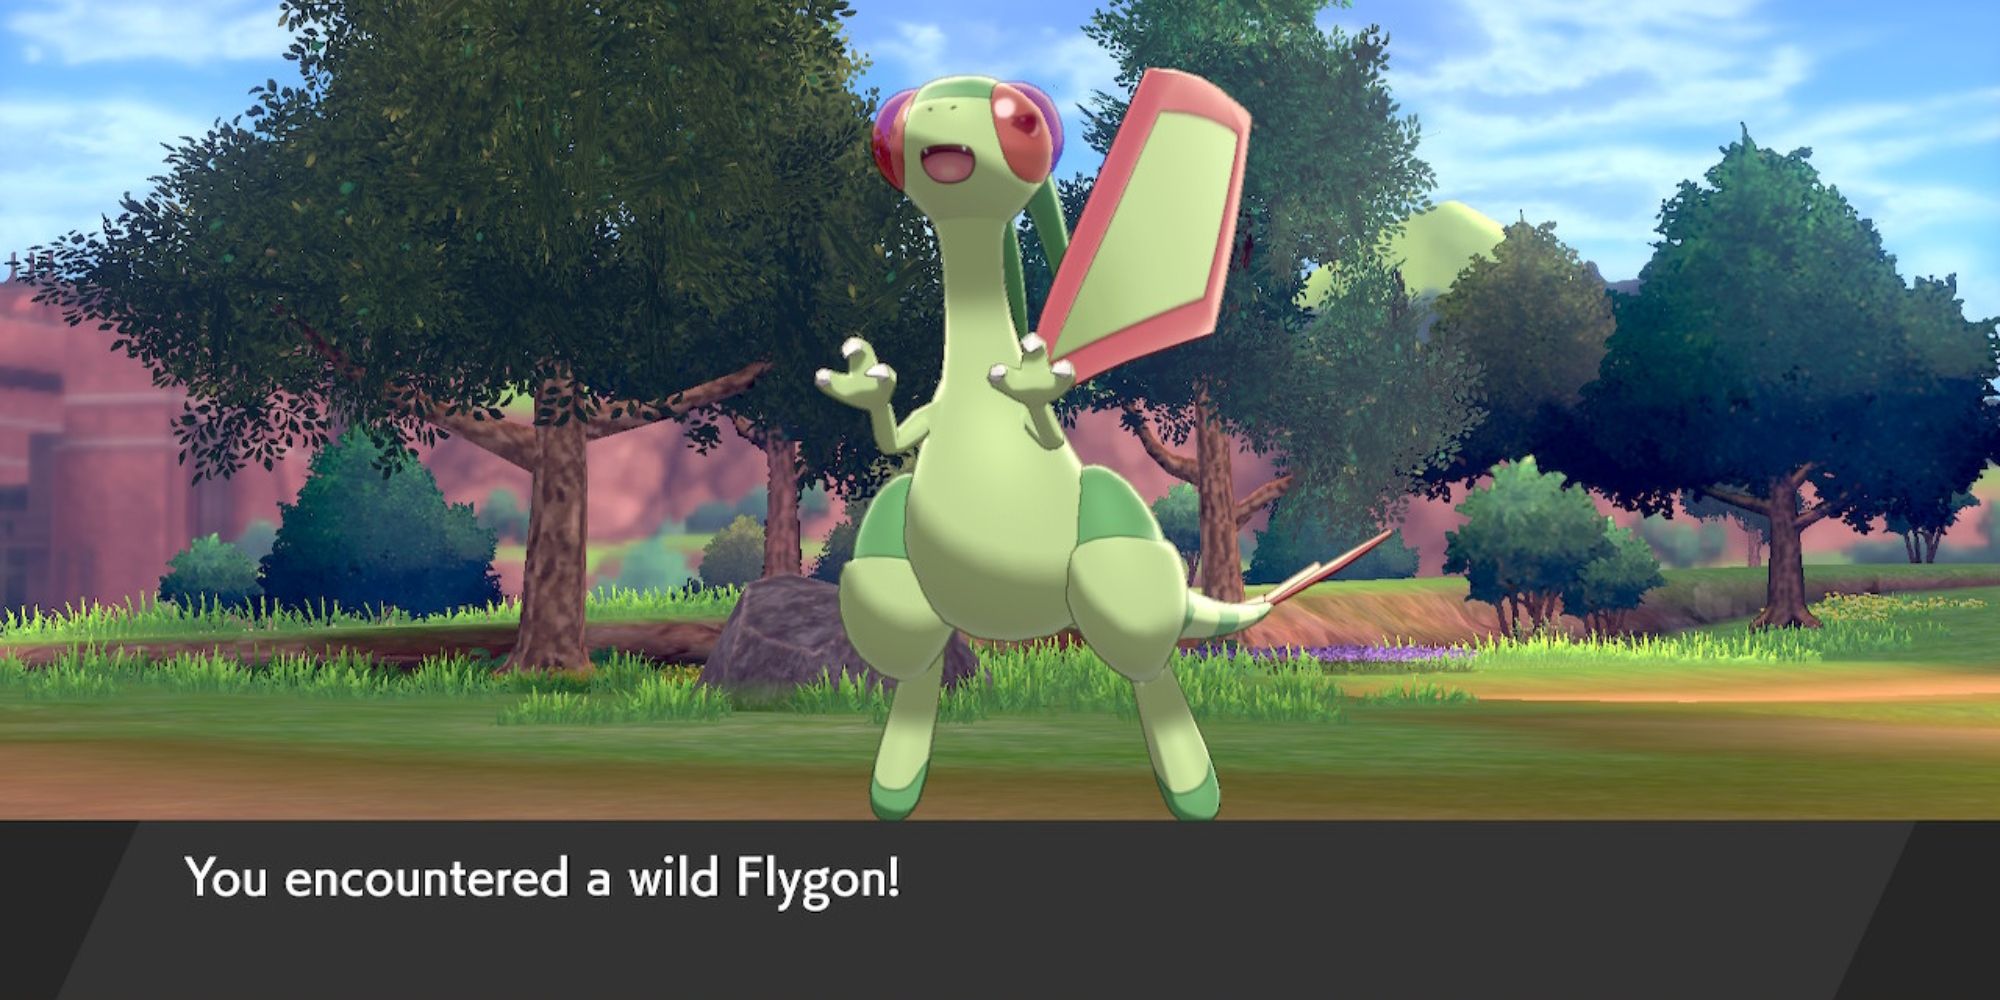 Flygon appears as a wild encounter in Pokemon Sword and Shield.